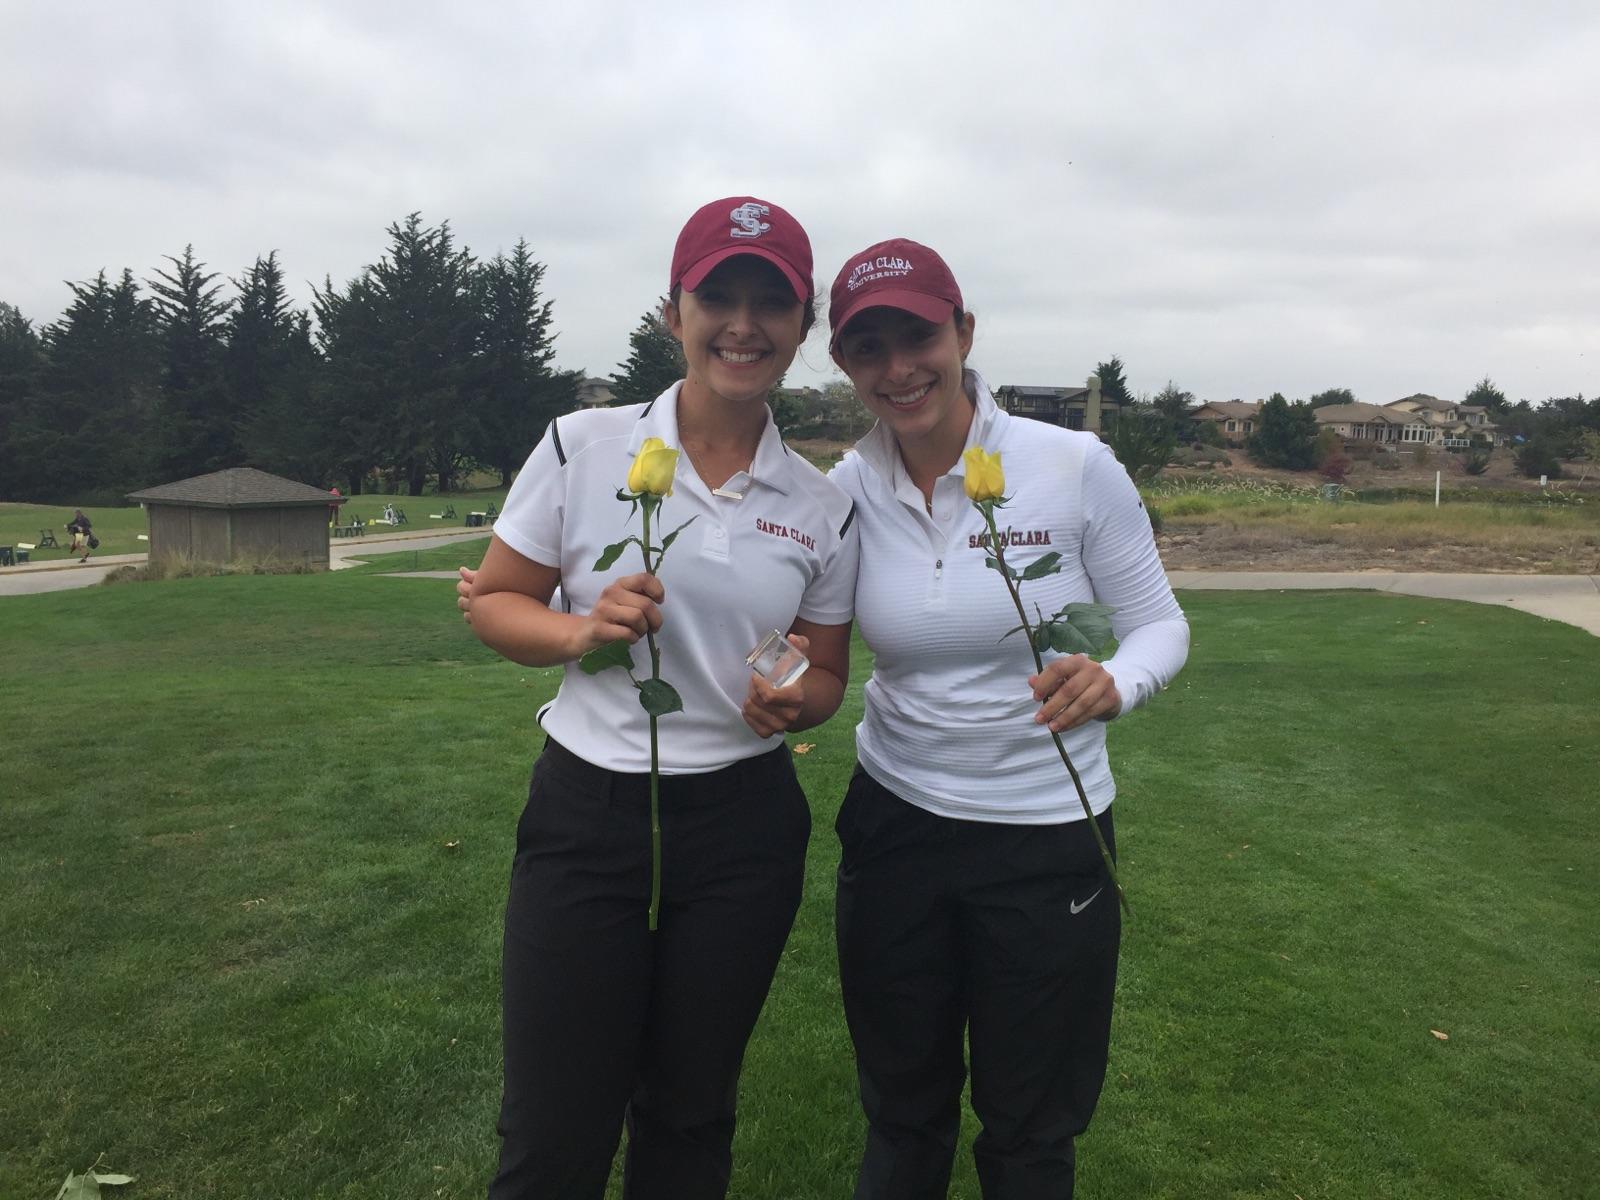 Women’s Golf Takes Title at Cal Poly Invitational; Moreno, Murez Tie For Runner-up Honors